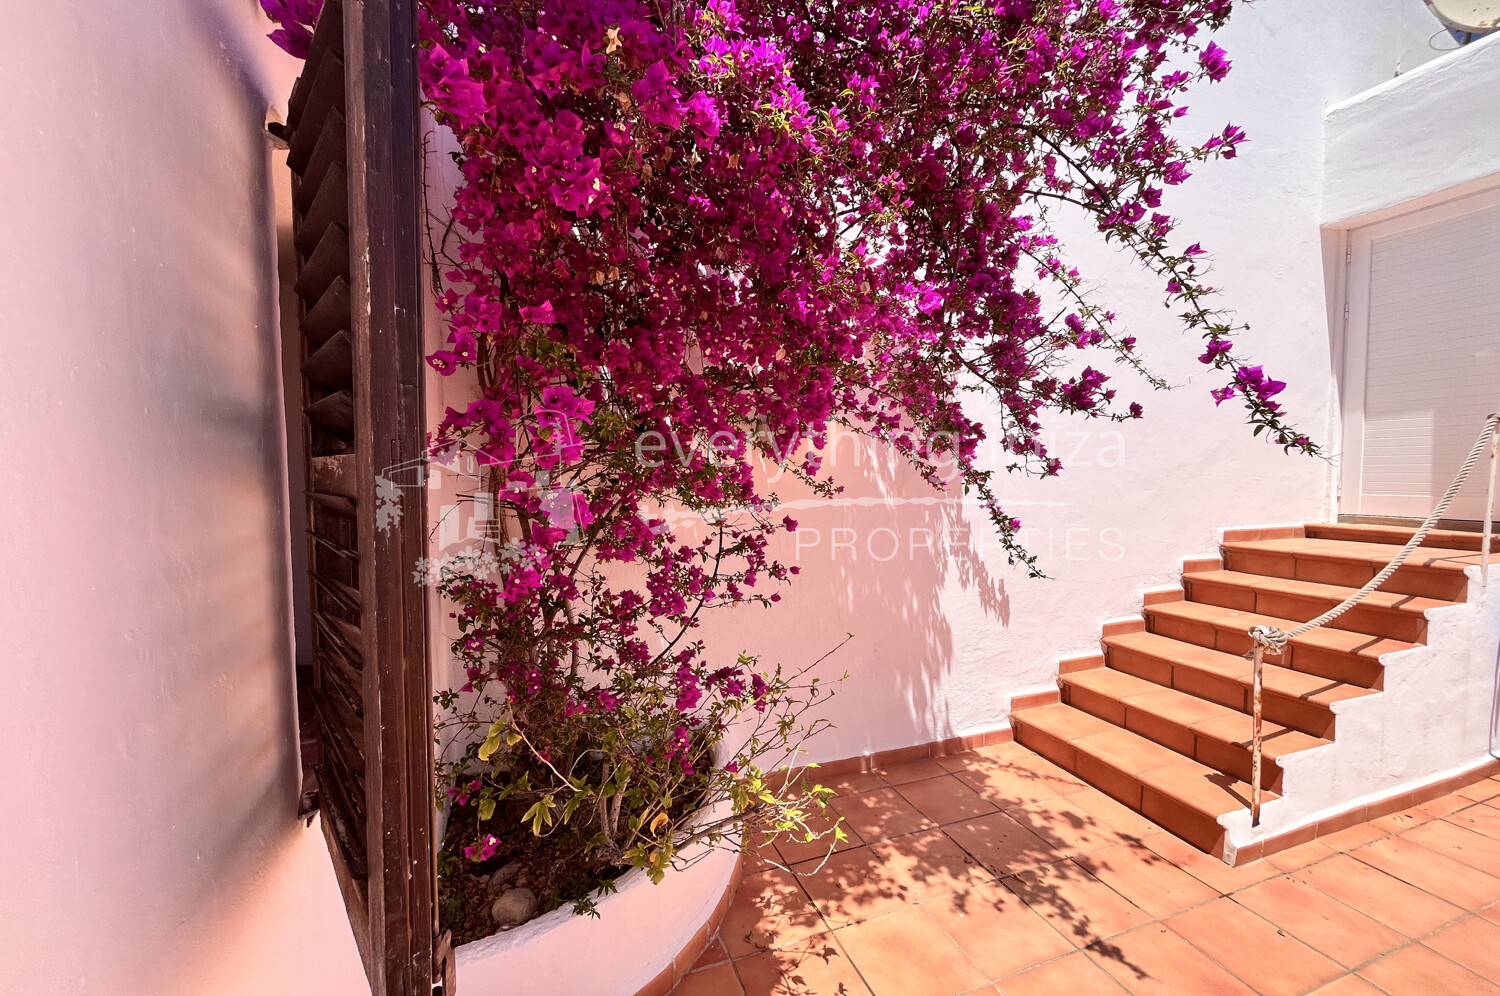 Elegant Traditional Semi Detached House with Lots of Charm and Es Vedra Views, ref. 1707, for sale in Ibiza by everything ibiza Properties